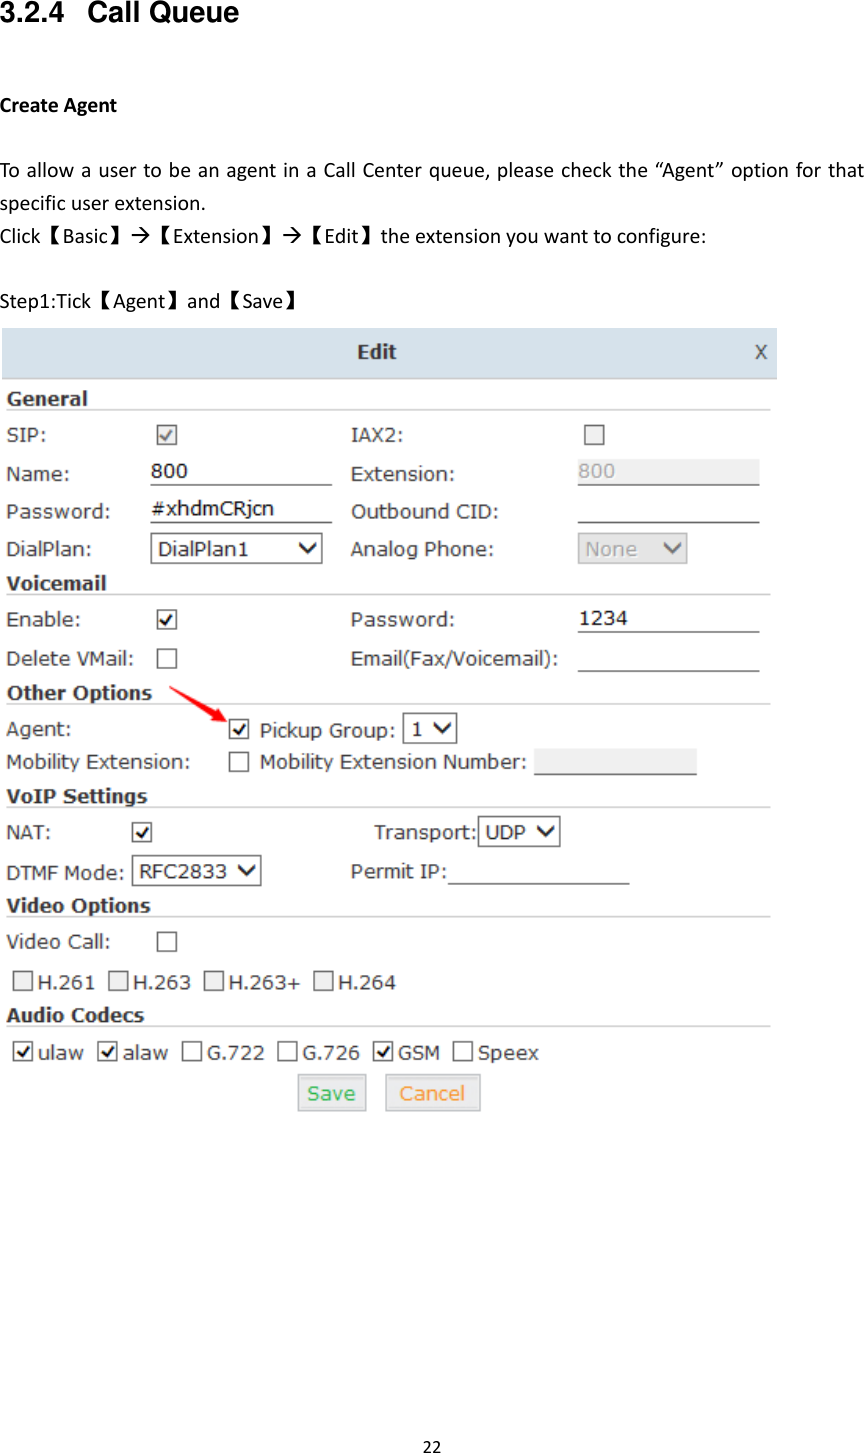  22  3.2.4  Call Queue  Create Agent  To allow a user to be an agent in a Call Center queue, please check the “Agent” option for that specific user extension. Click【Basic】【Extension】【Edit】the extension you want to configure:  Step1:Tick【Agent】and【Save】           